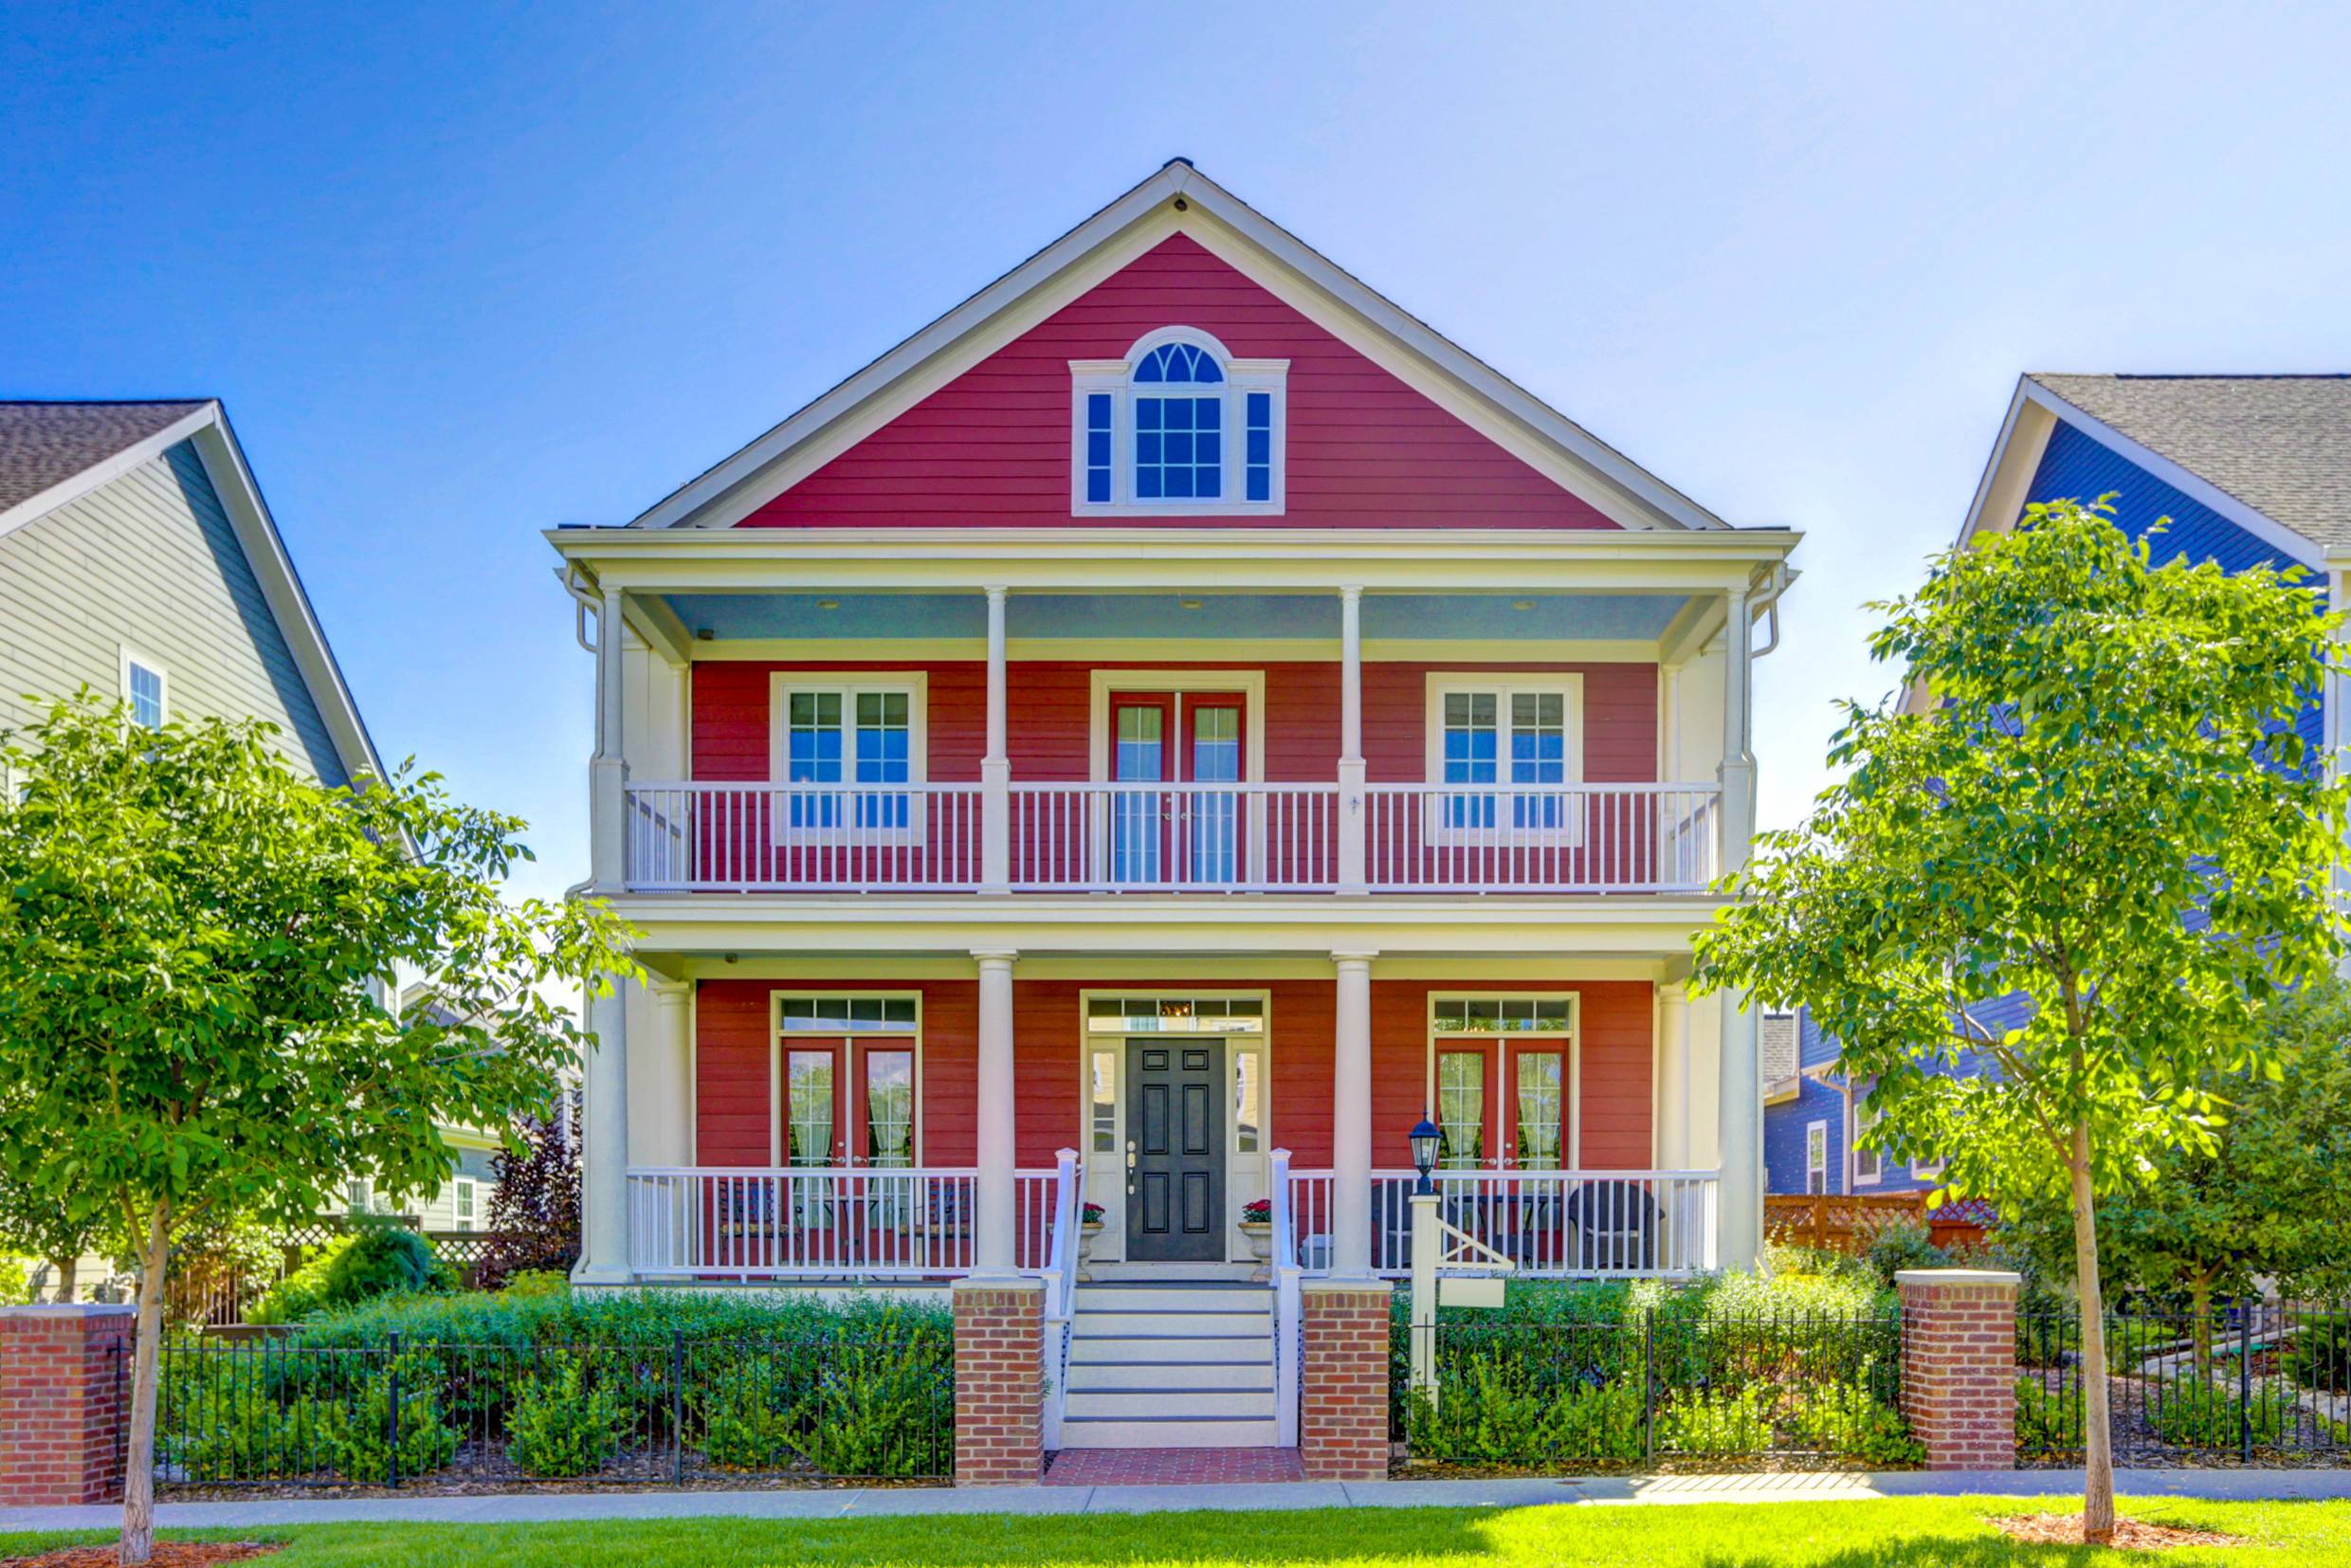 Red is a bold choice for a house exterior  (from Houzz)